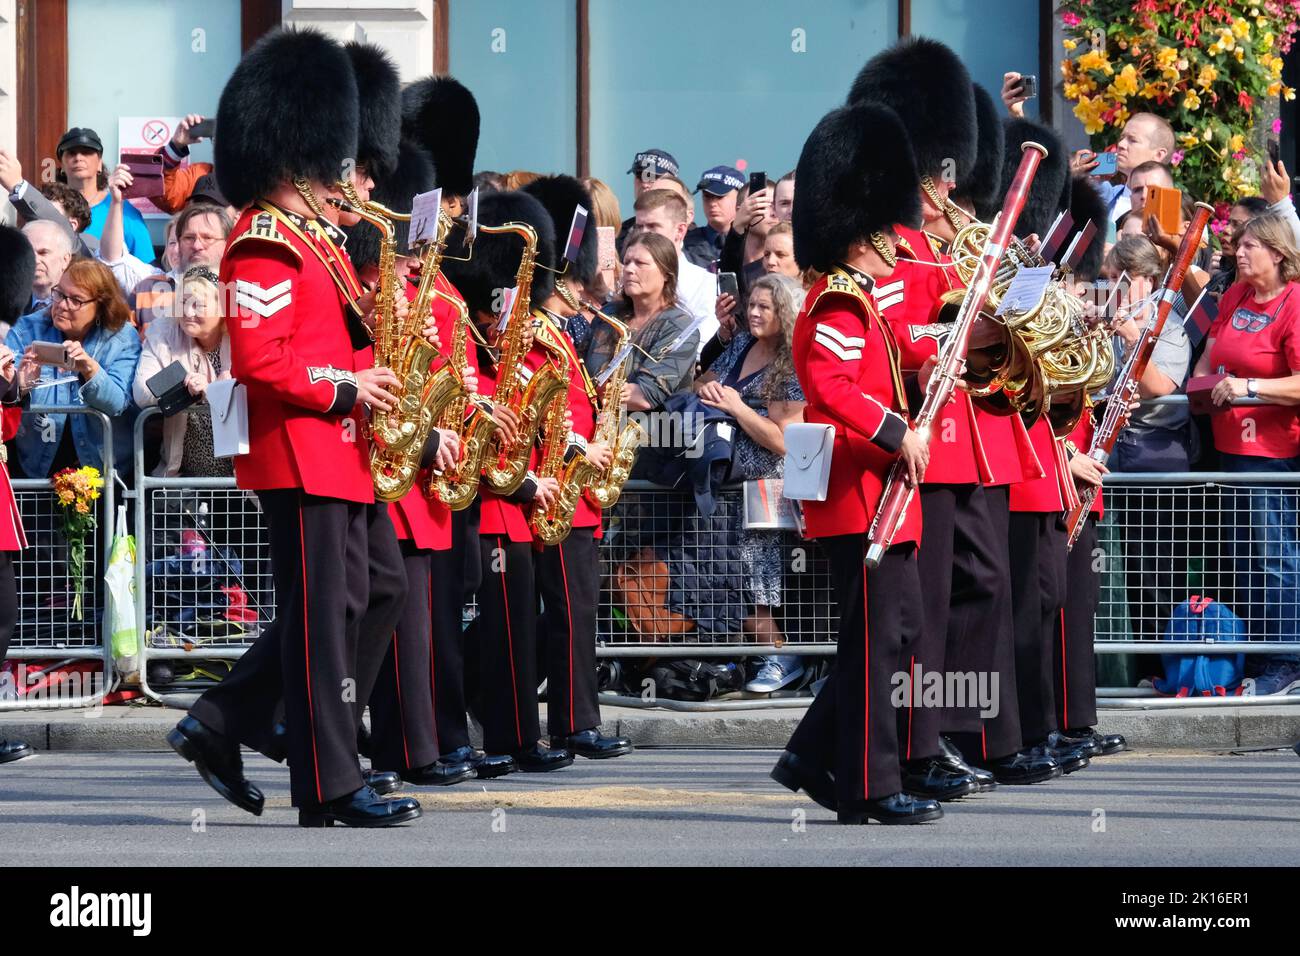 London, UK. The Queen's coffin procession reaches Whitehall led by a marching band. Her casket will lie-in-state for four days ahead of her funeral. Stock Photo